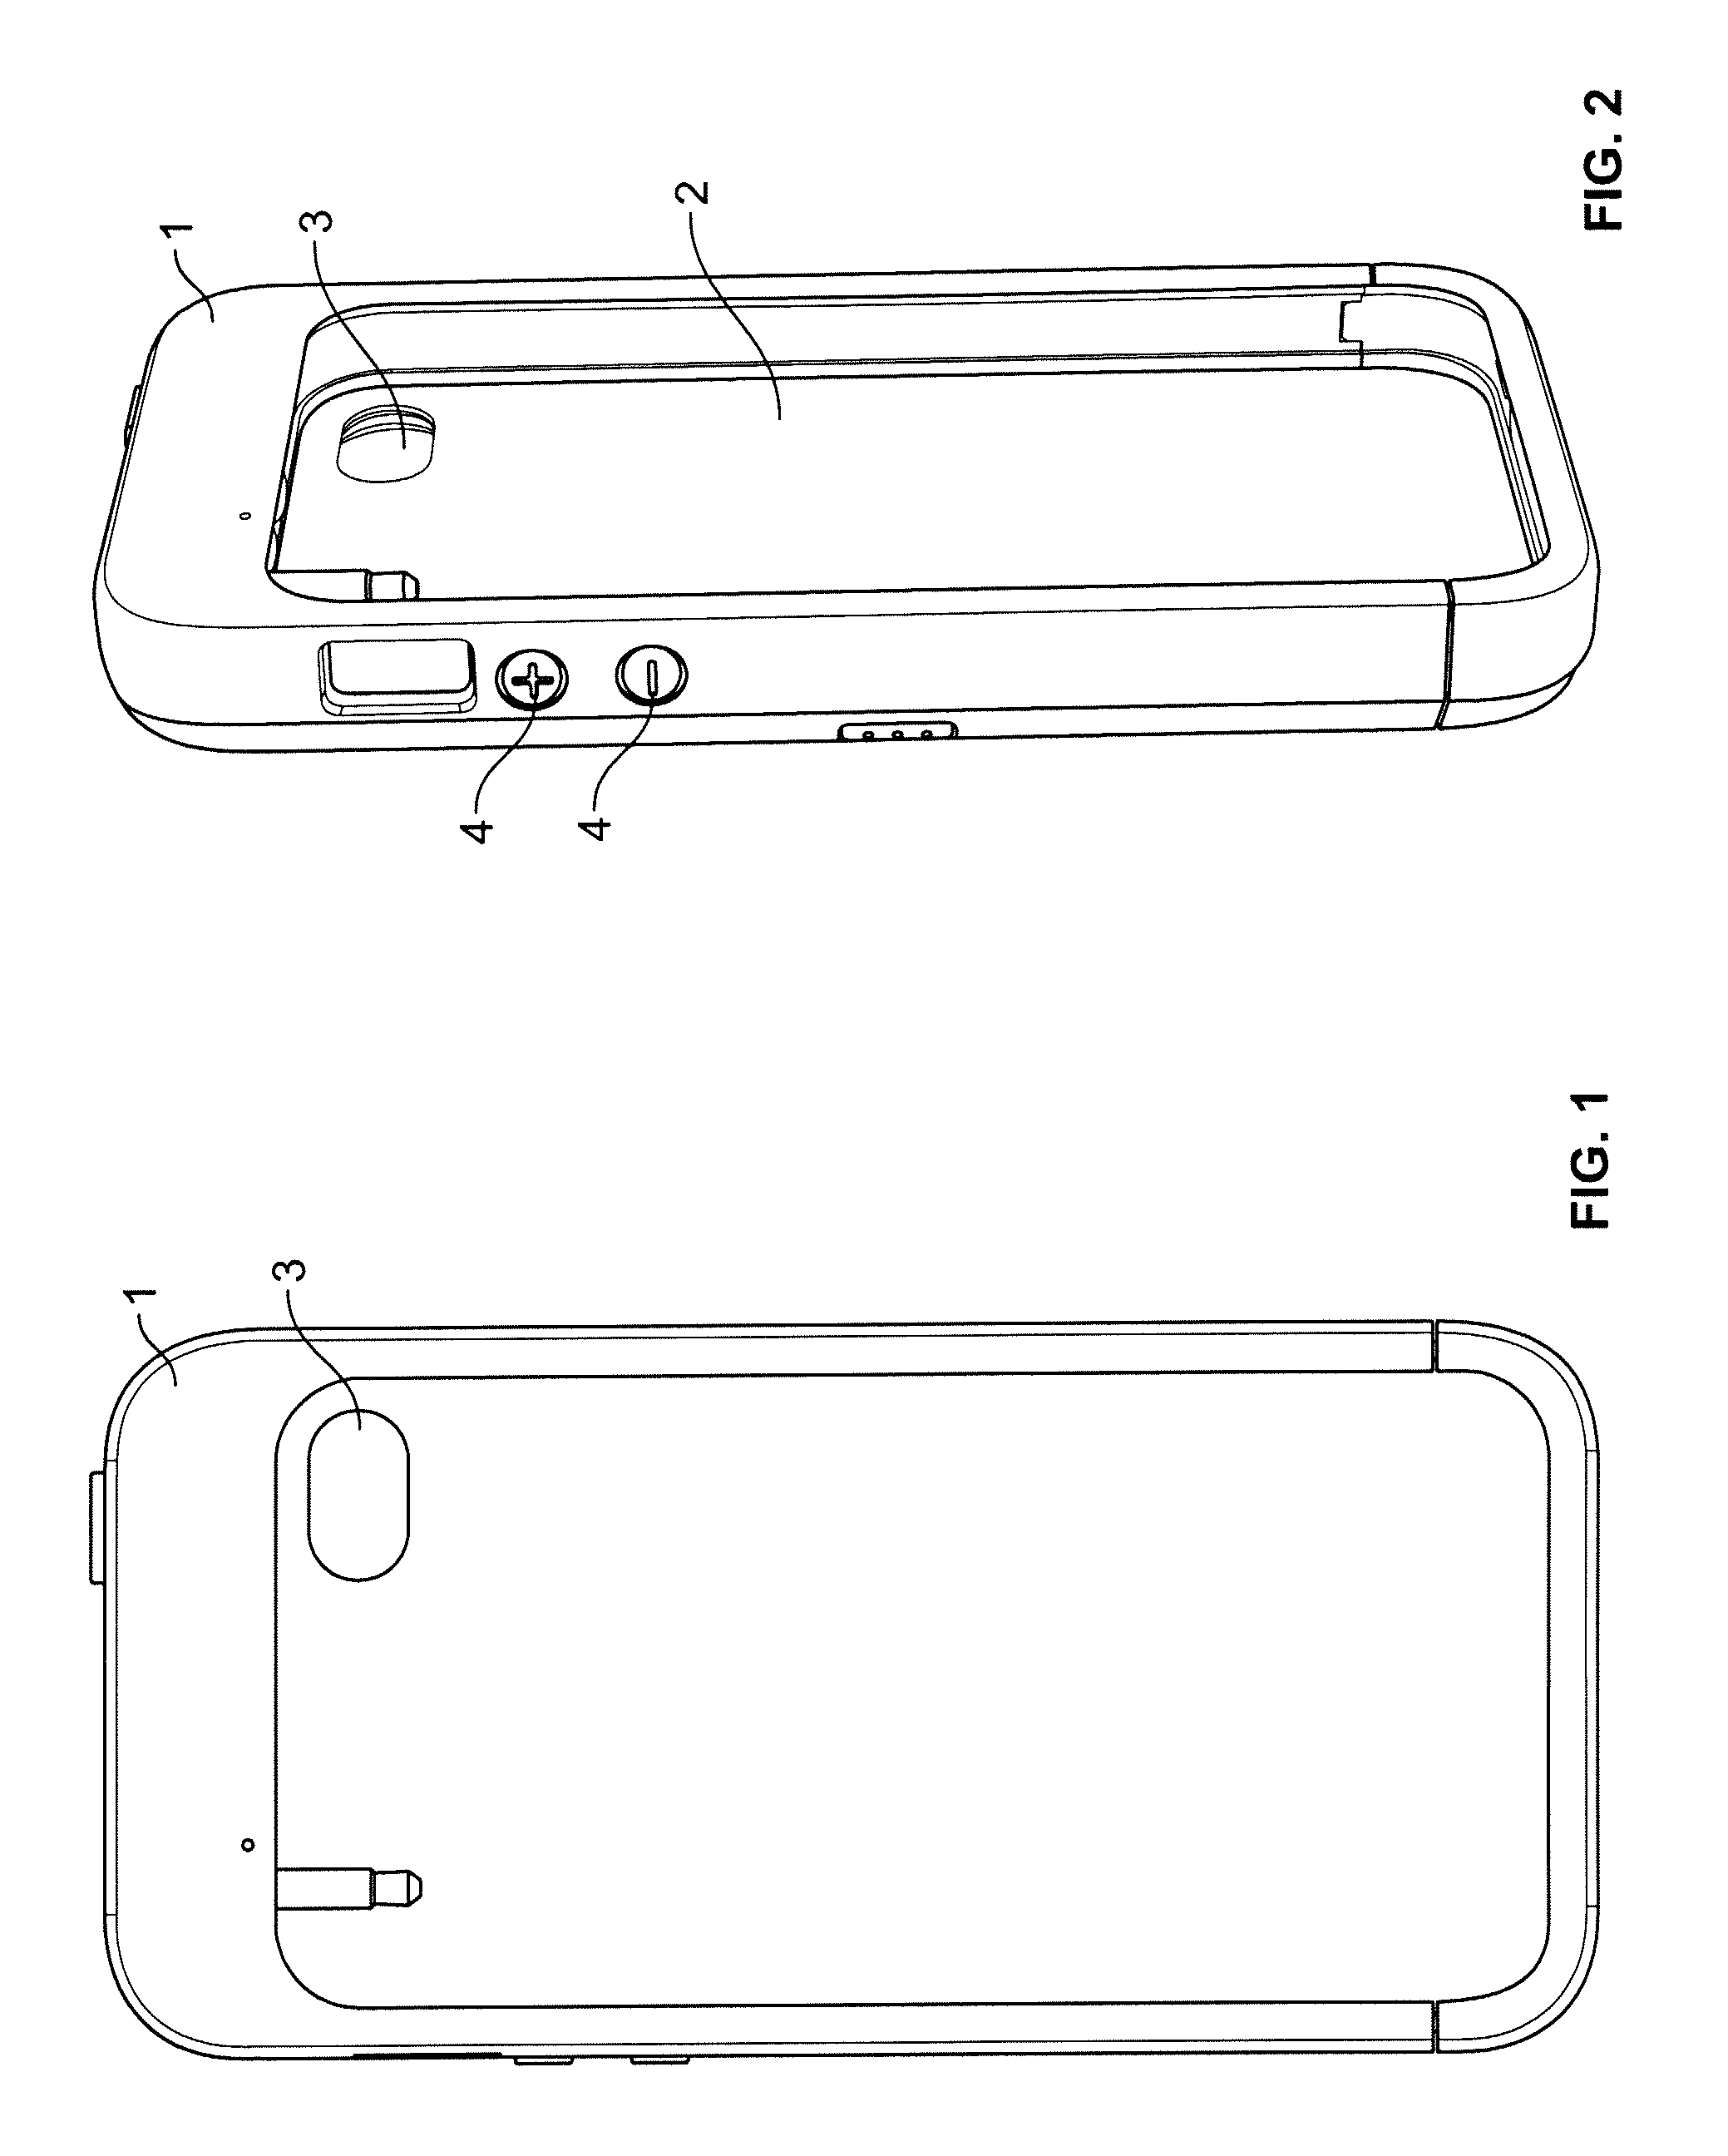 Health risk, mitigating, retractable, wired headset and protective case platform for wireless communication devices